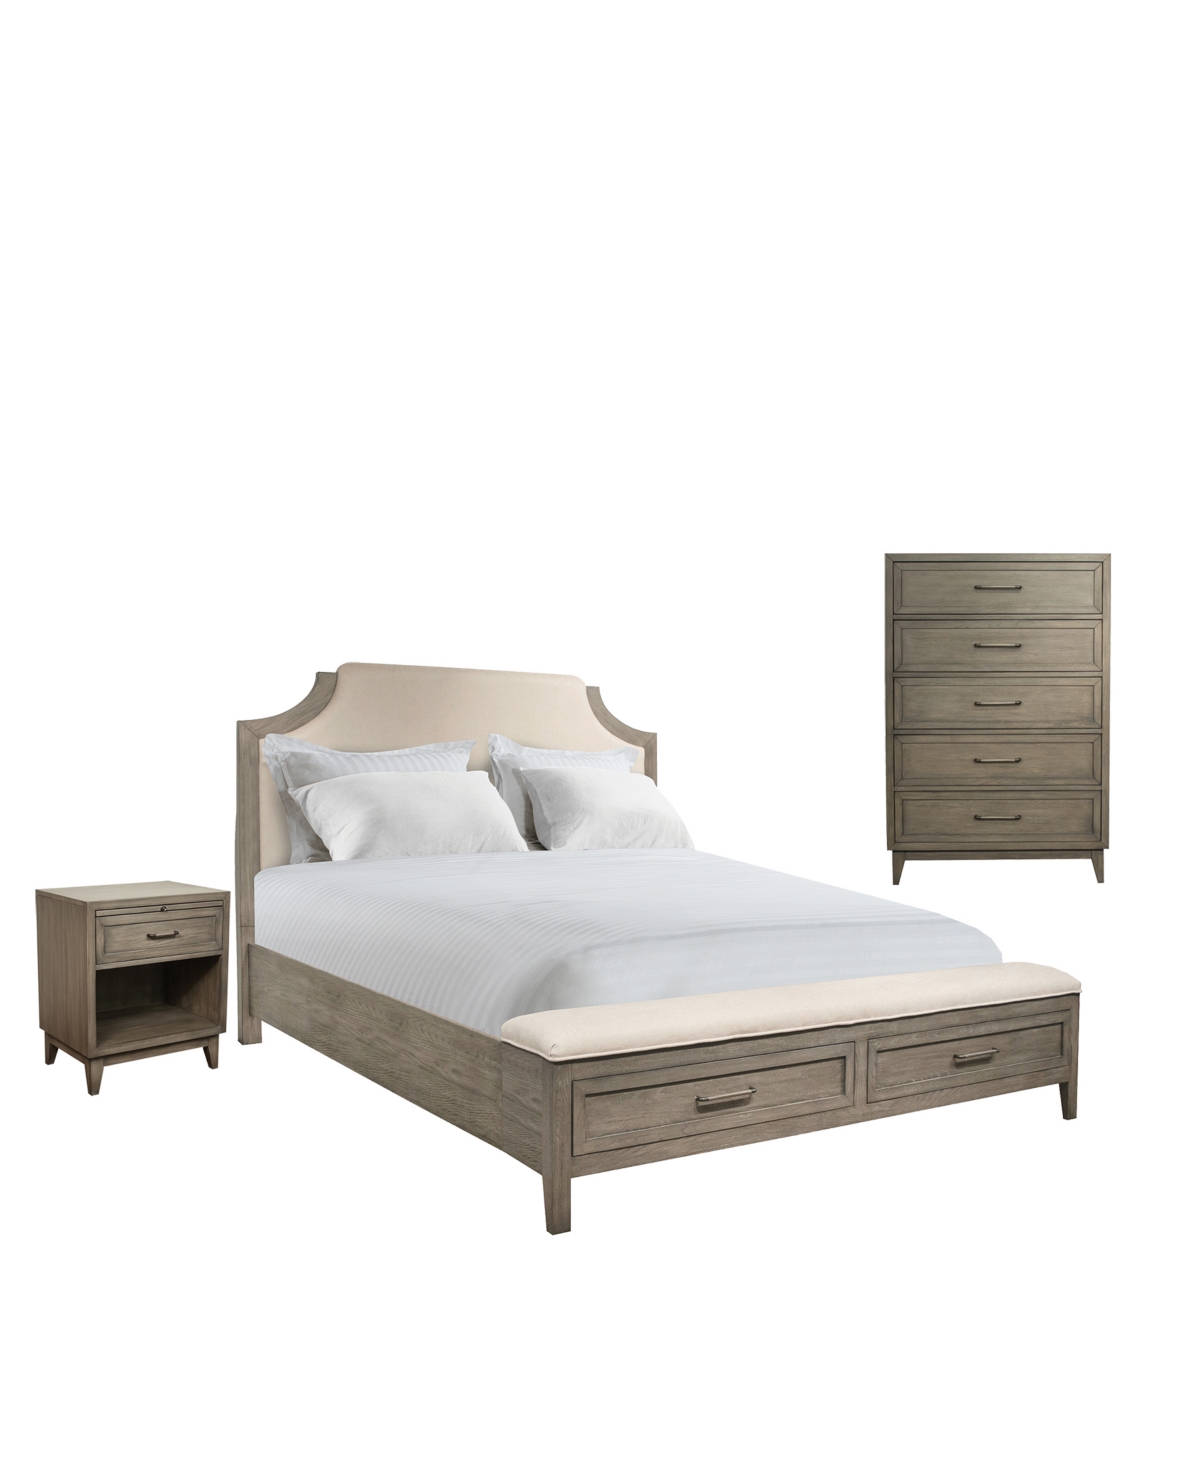 Furniture Vogue 3pc Bedroom Set (queen Bed, Chest & One Drawer Nightstand)